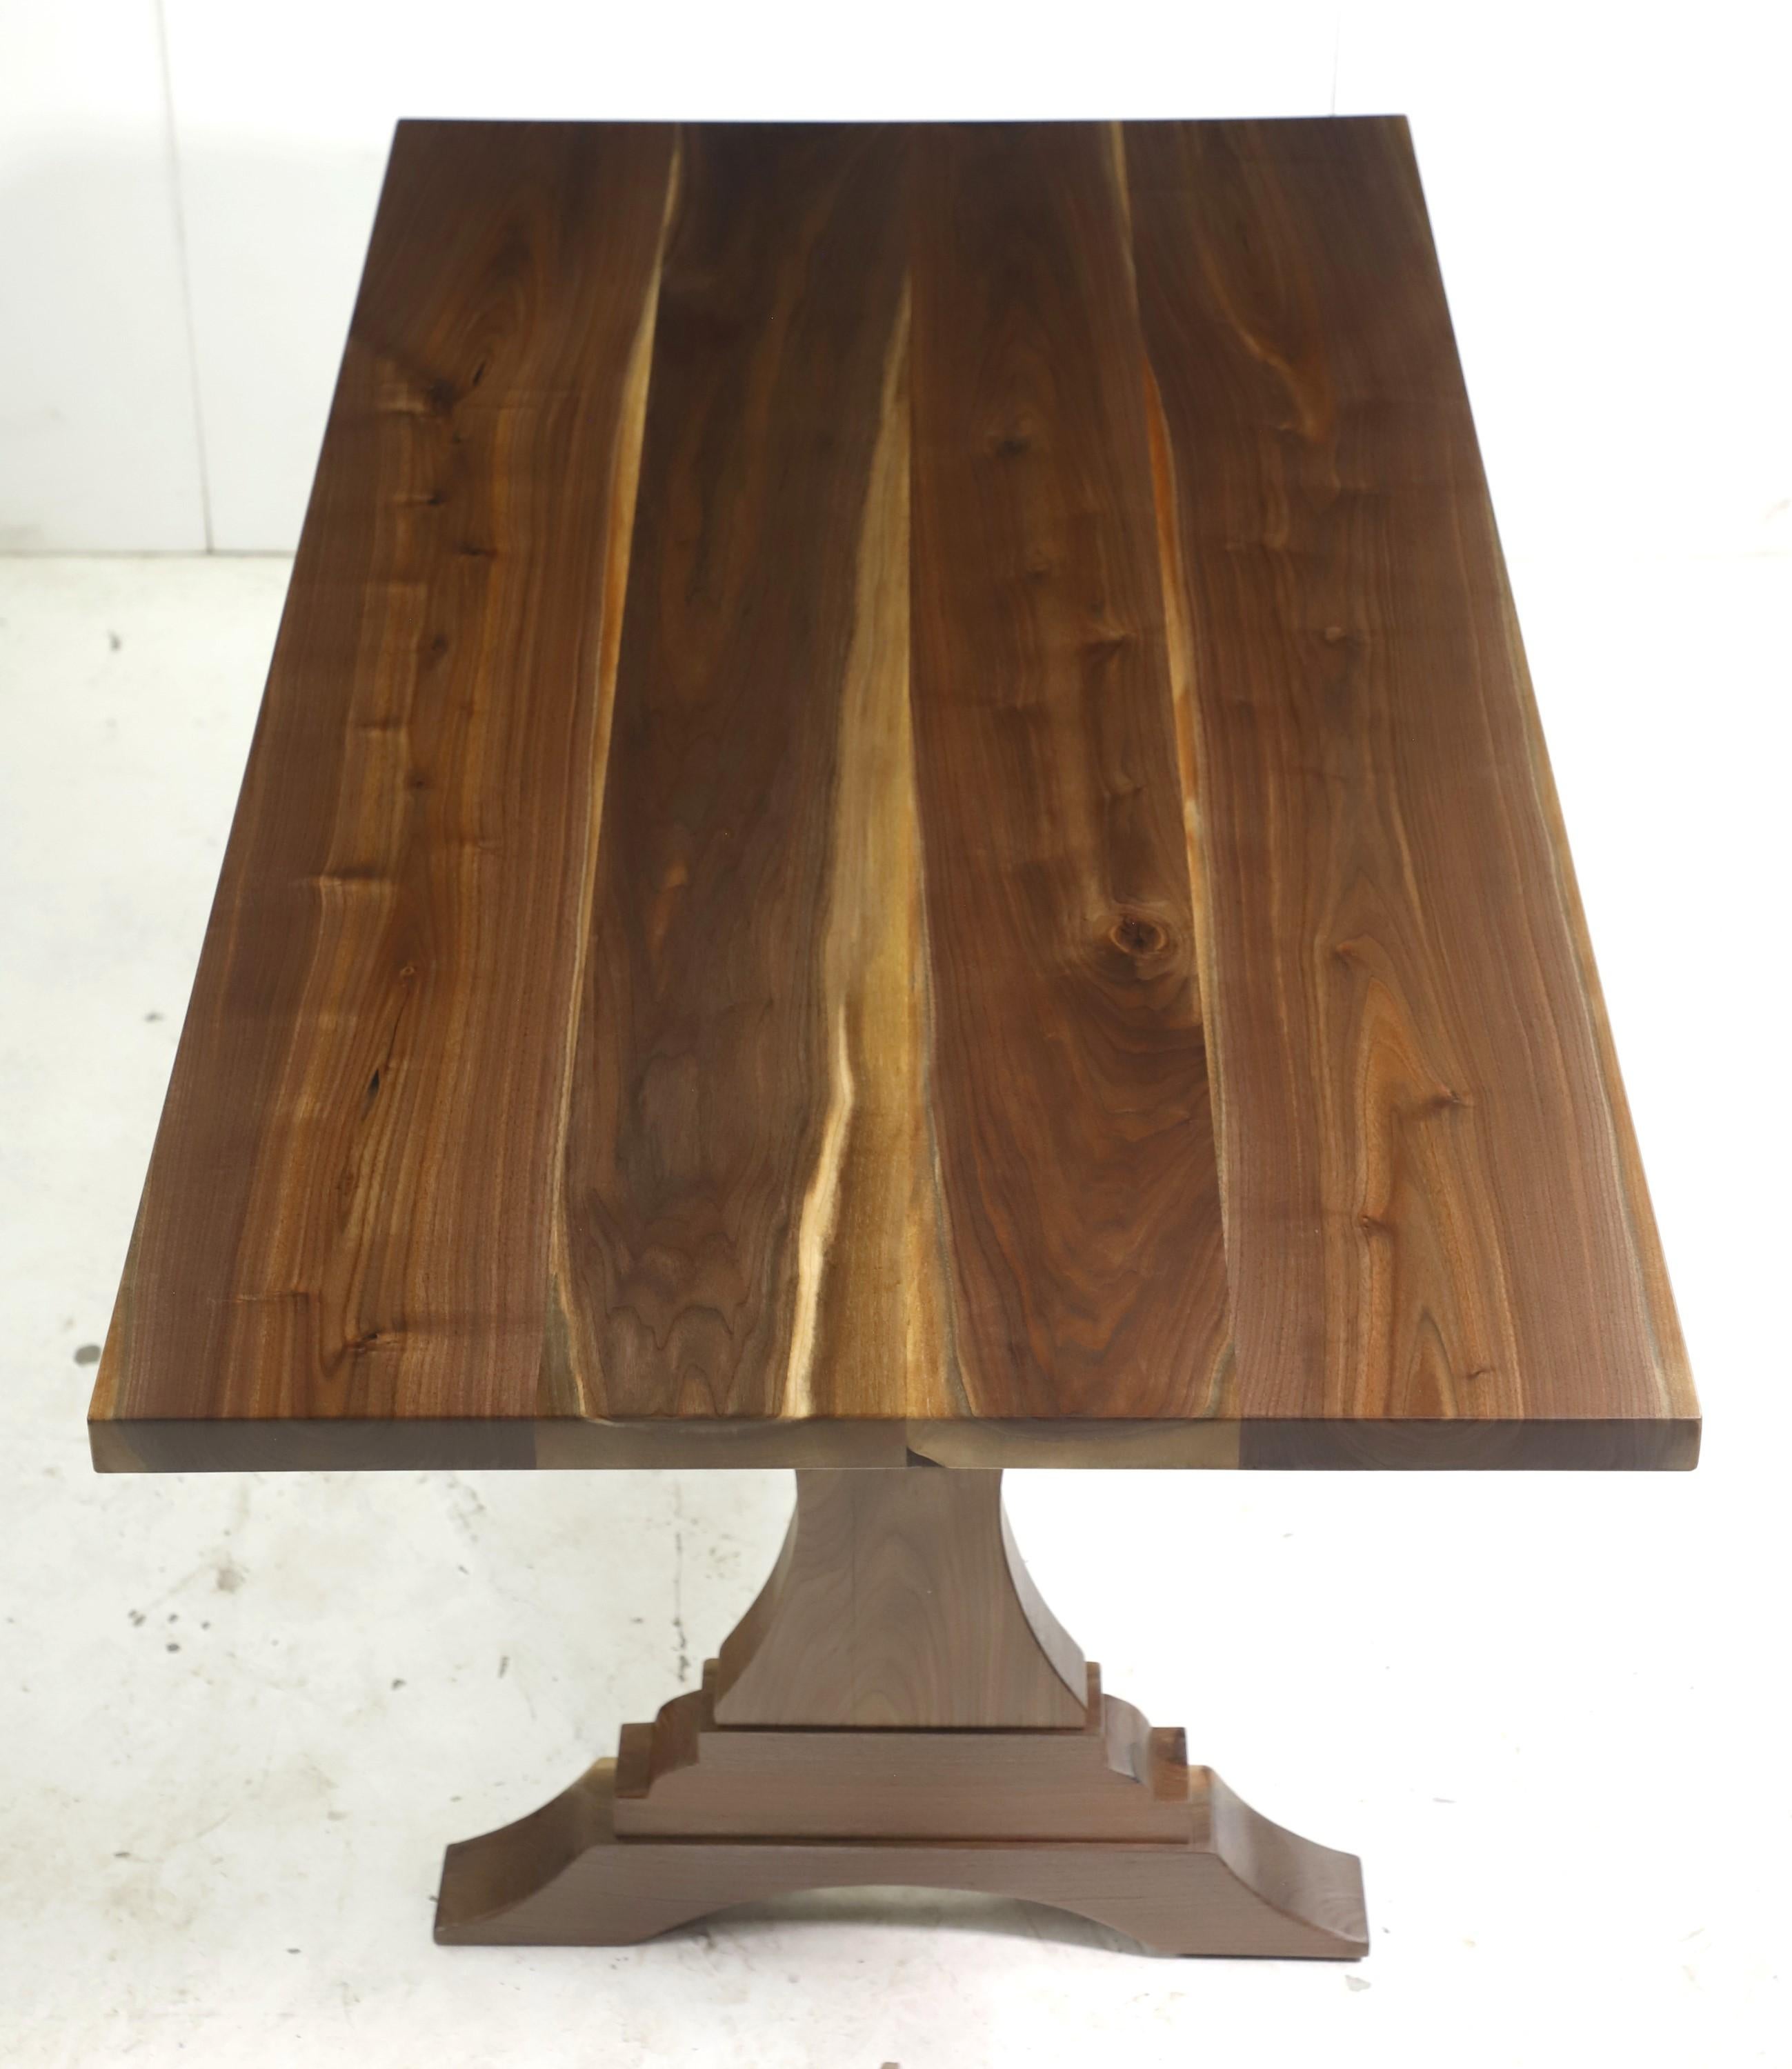 This dinging harvest farm table features a four slab solid walnut top paired with trestle legs. This table is ready to ship. Please note, this item is located in our Scranton, PA location.